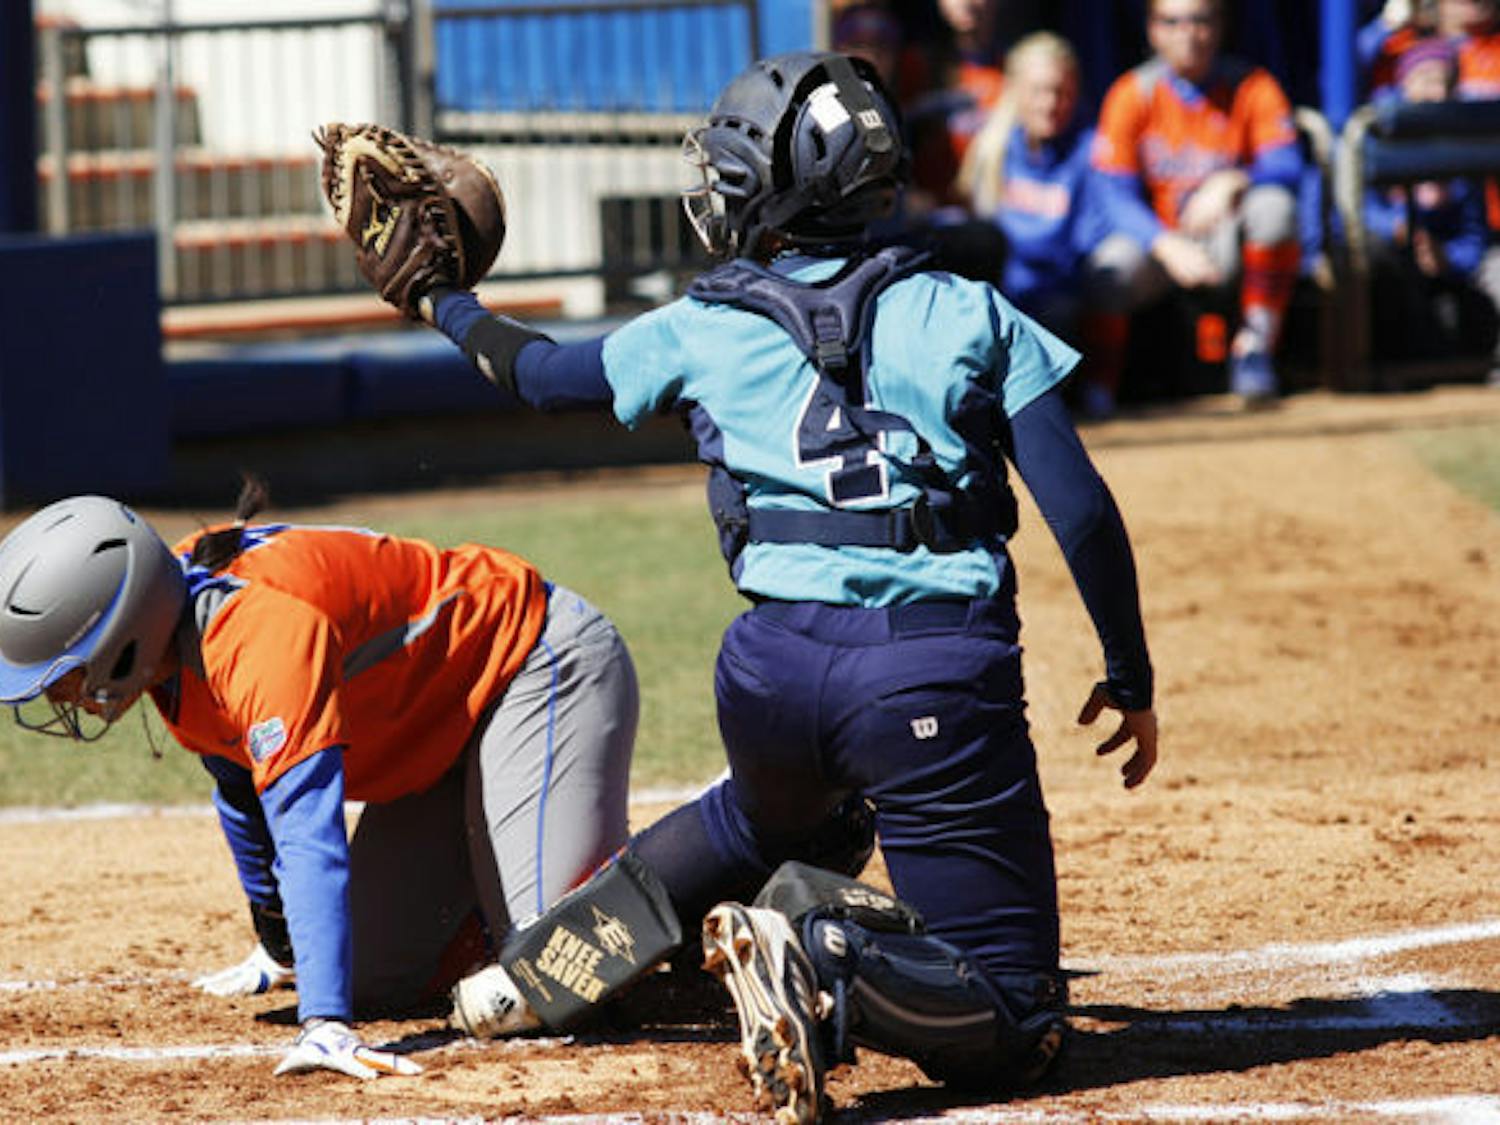 Kelsey Stewart gets tagged out at home during Florida’s 9-1 win against UNC Wilmington on Feb. 17 at Katie Seashole Pressly Stadium. Stewart picked up two hits in the Gators' 3-2 loss to Georgia on Friday.